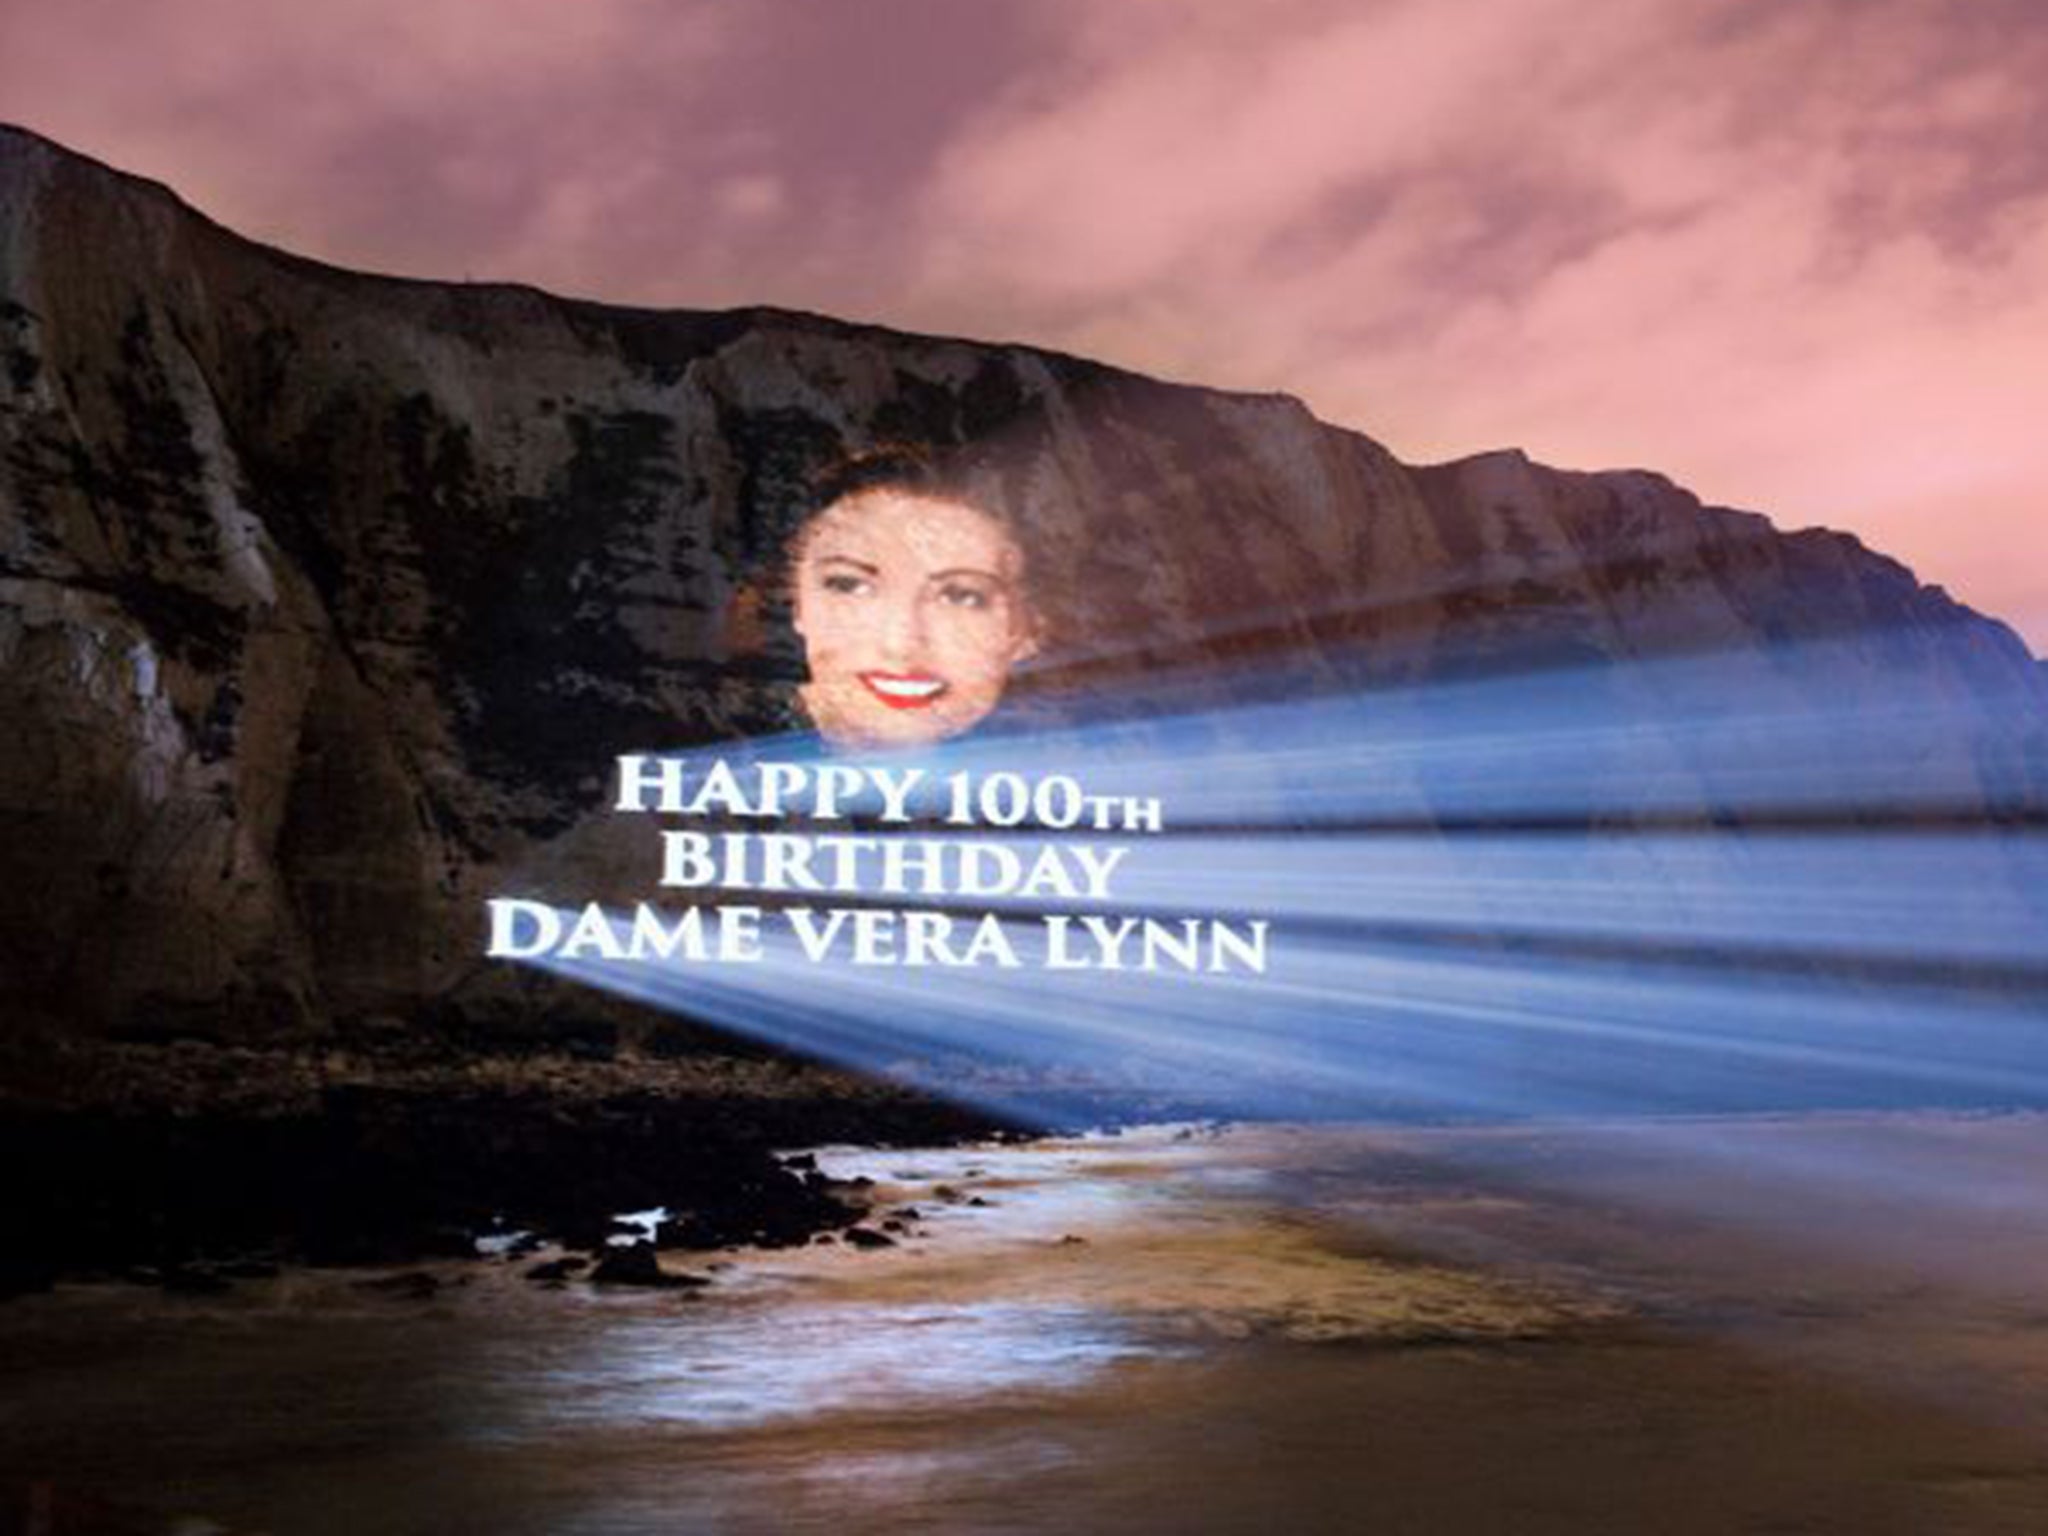 Dame Vera Lynn portrait projected onto the White Cliffs of Dover to celebrate Dame Vera's 100th birthday and release of her new album 'Vera Lynn 100'